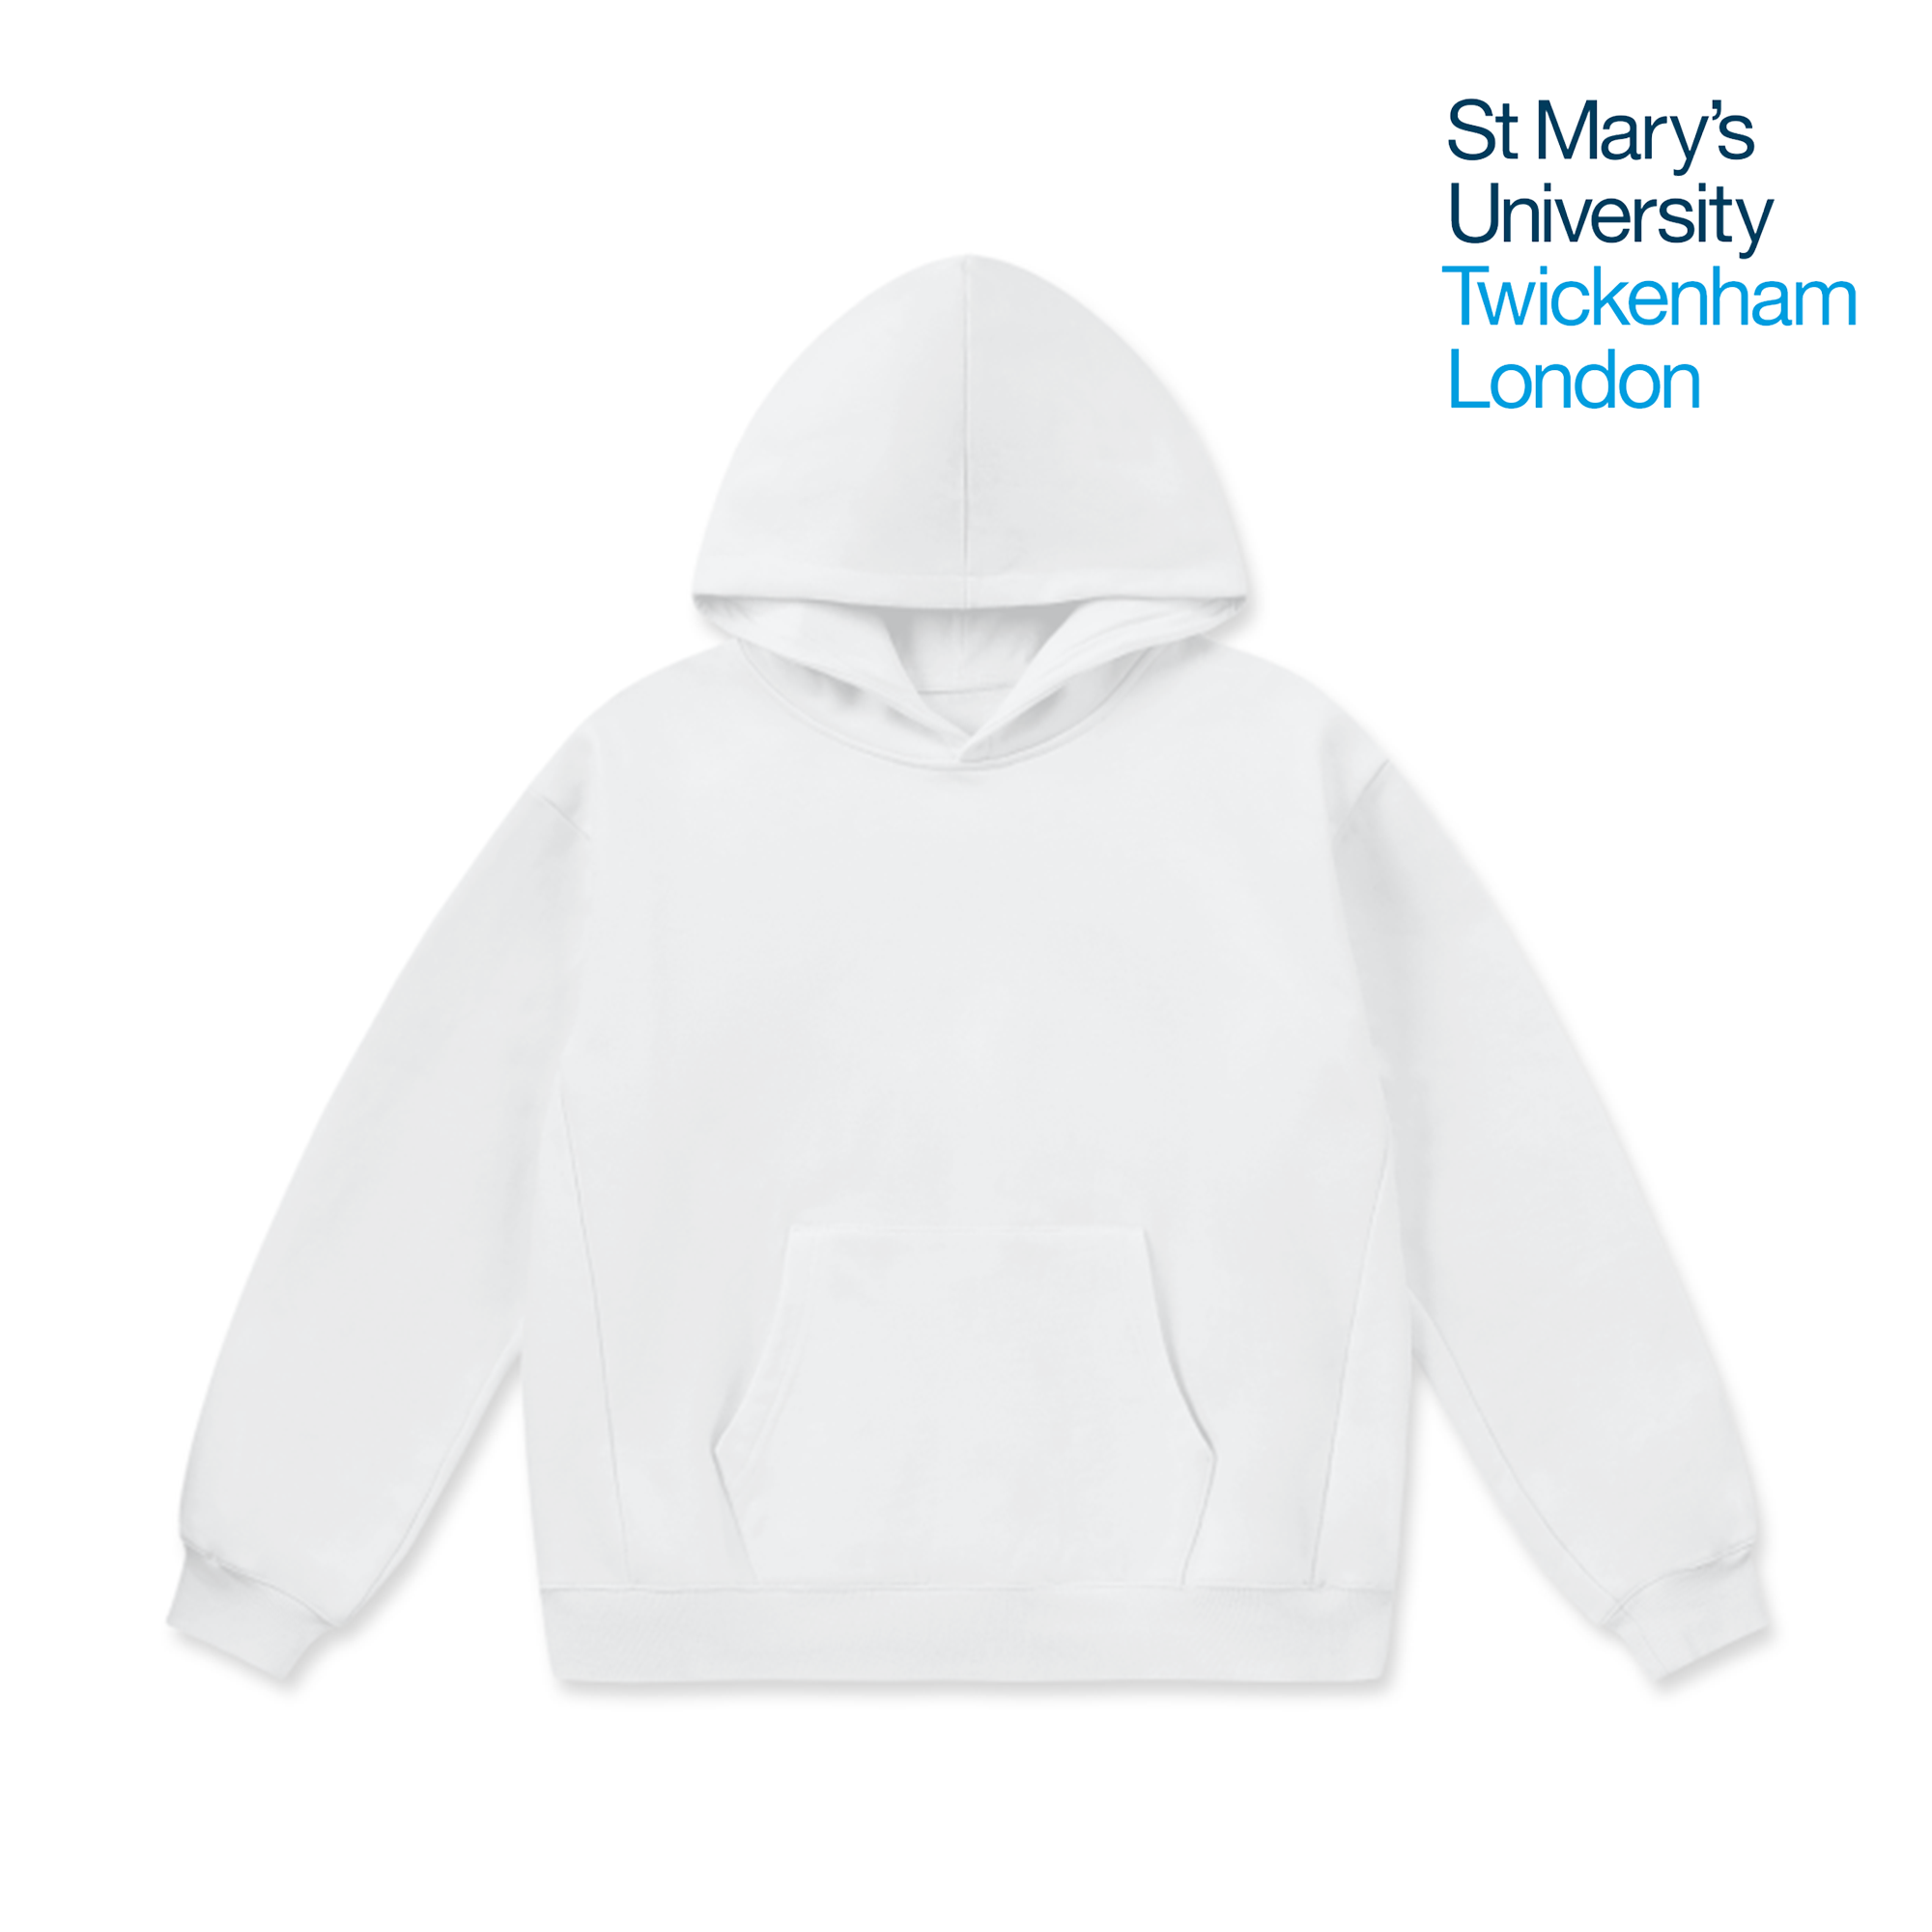 LCC Super Weighted Hoodie - St Mary's University (Modern)